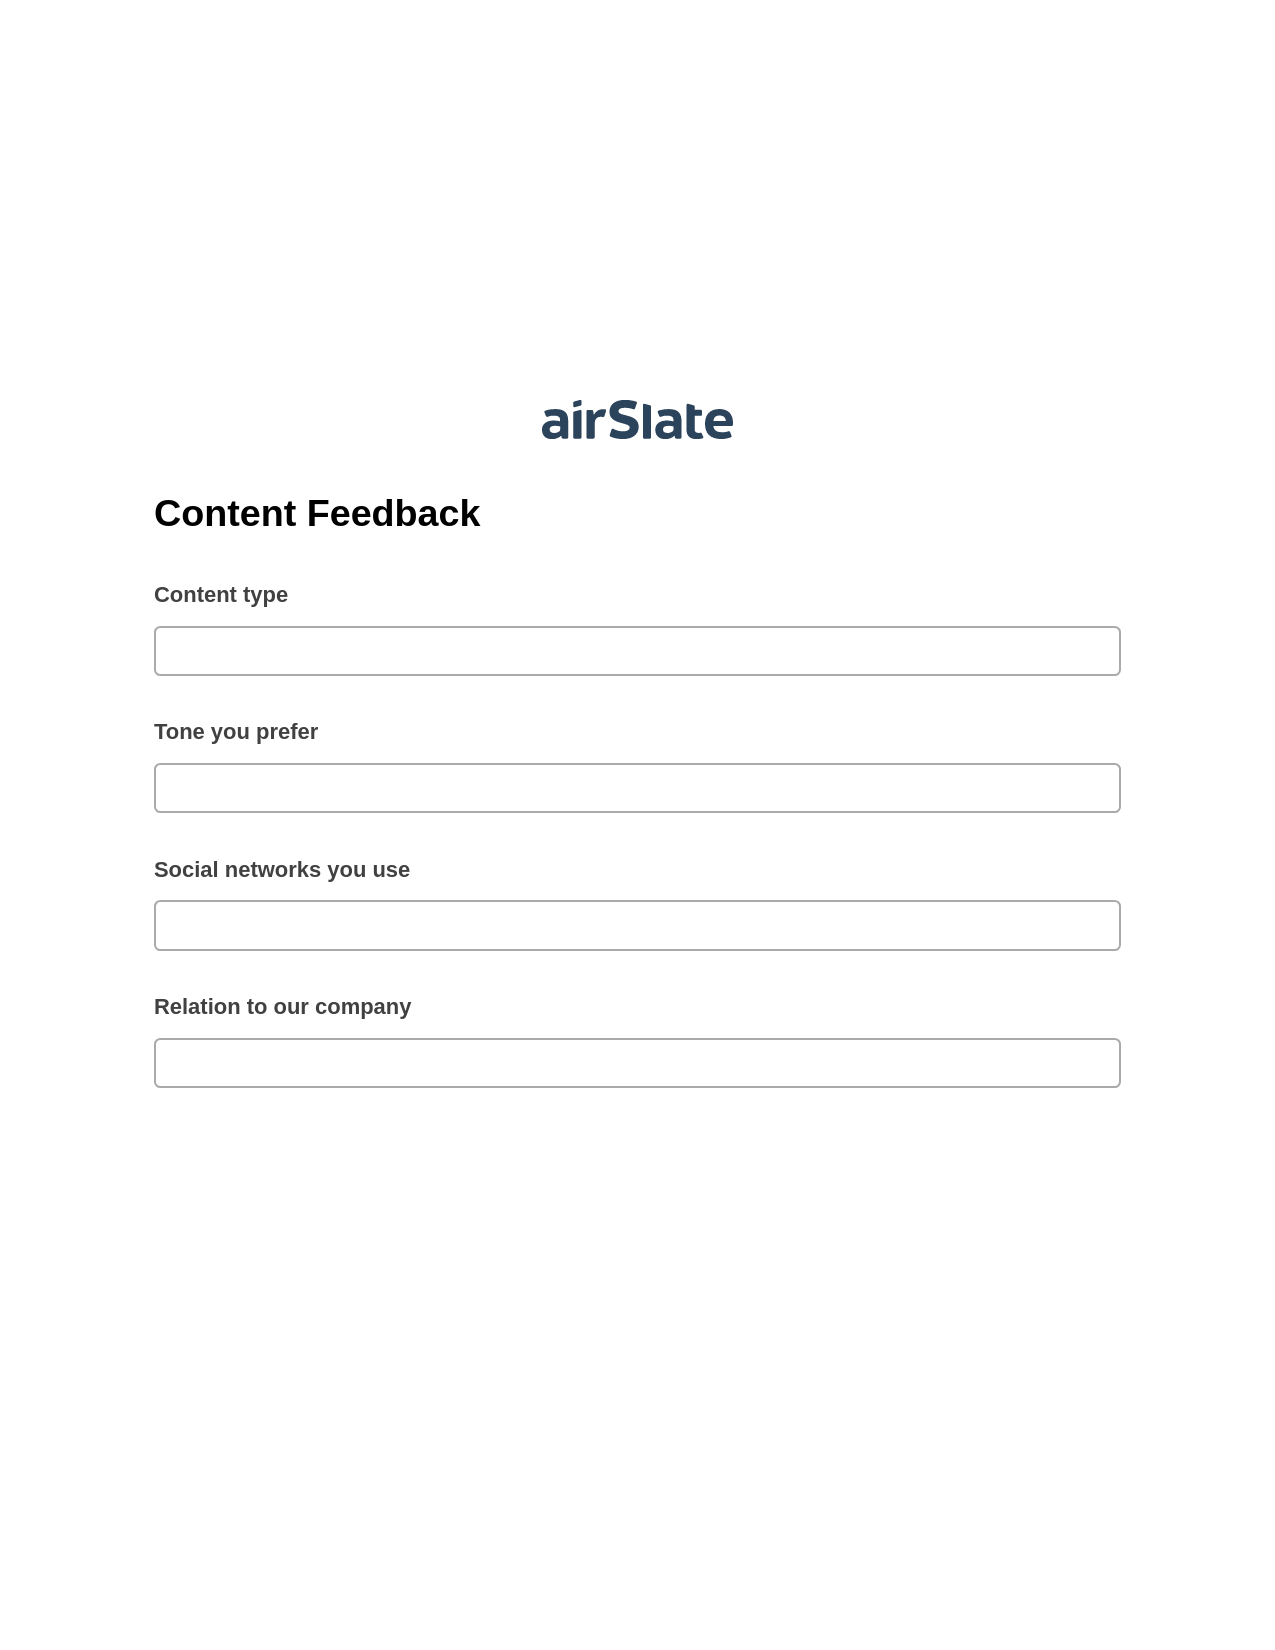 Content Feedback Pre-fill Dropdown from Airtable, Lock the slate bot, Archive to SharePoint Folder Bot